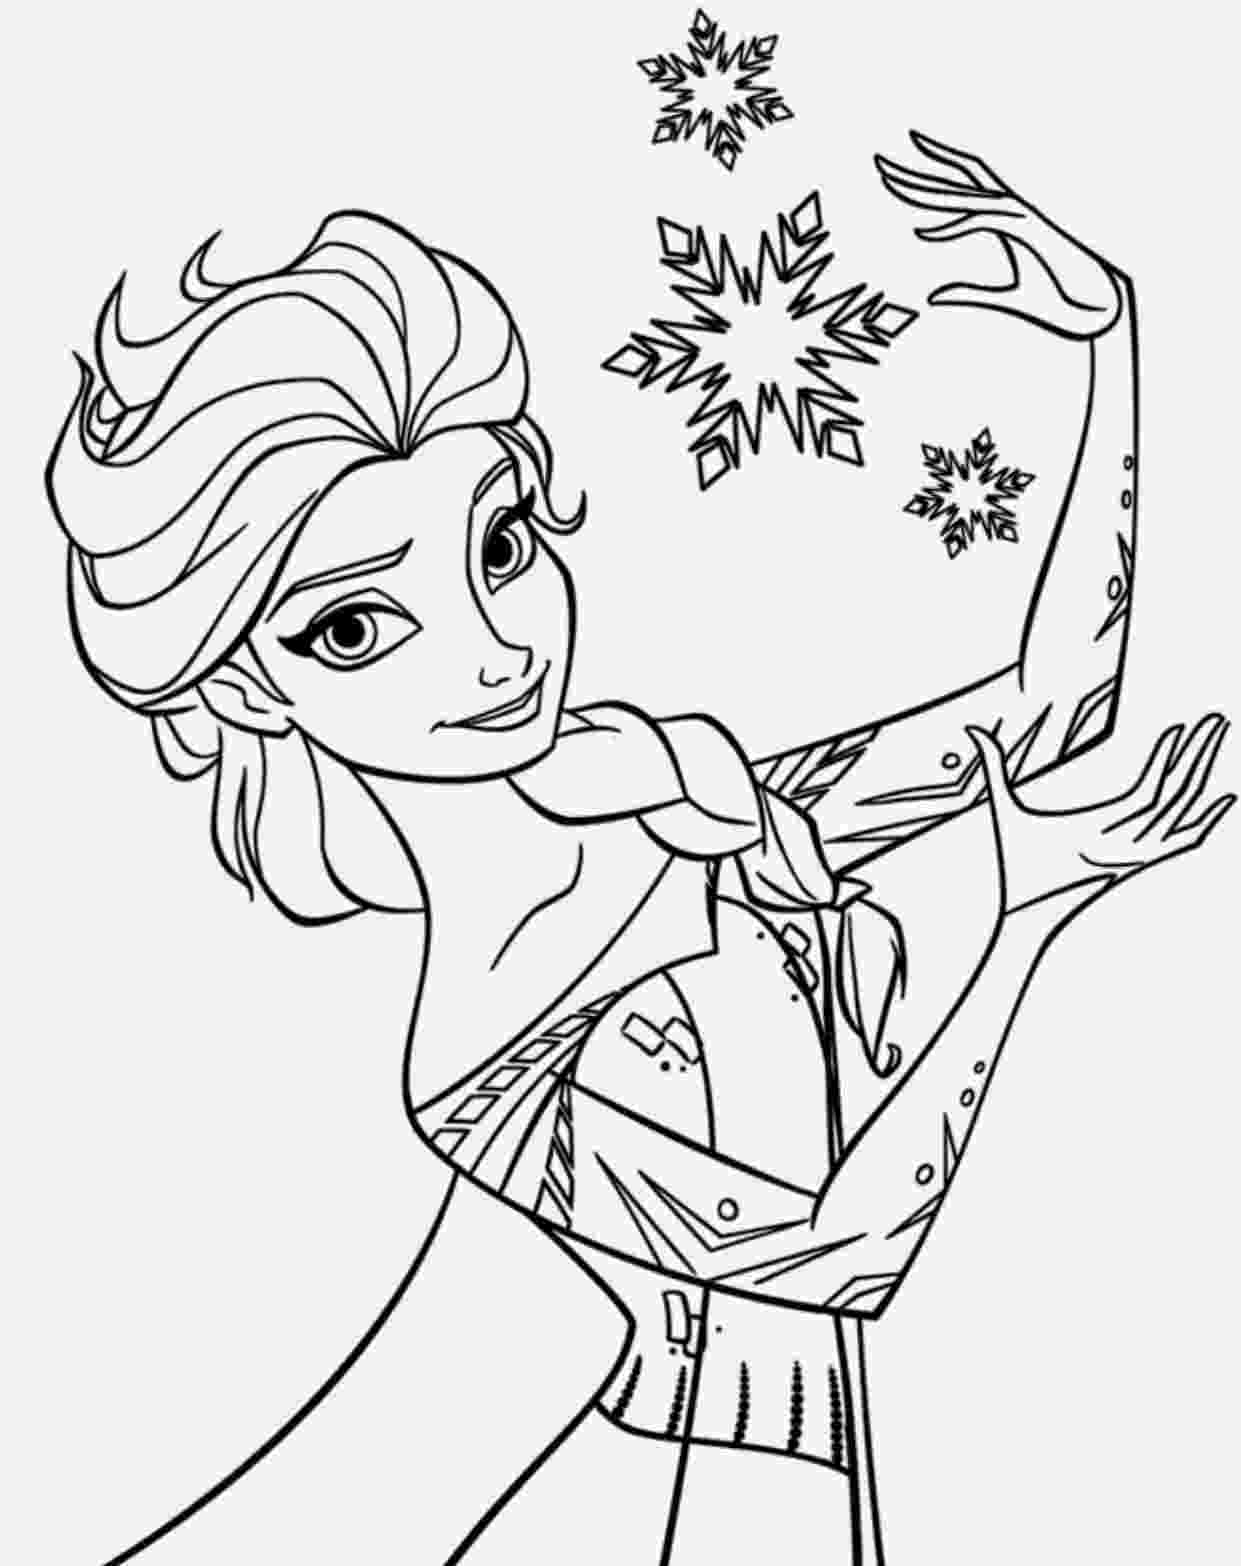 frozen characters coloring pages free printables for the disney movie frozen skgaleana frozen coloring characters pages 